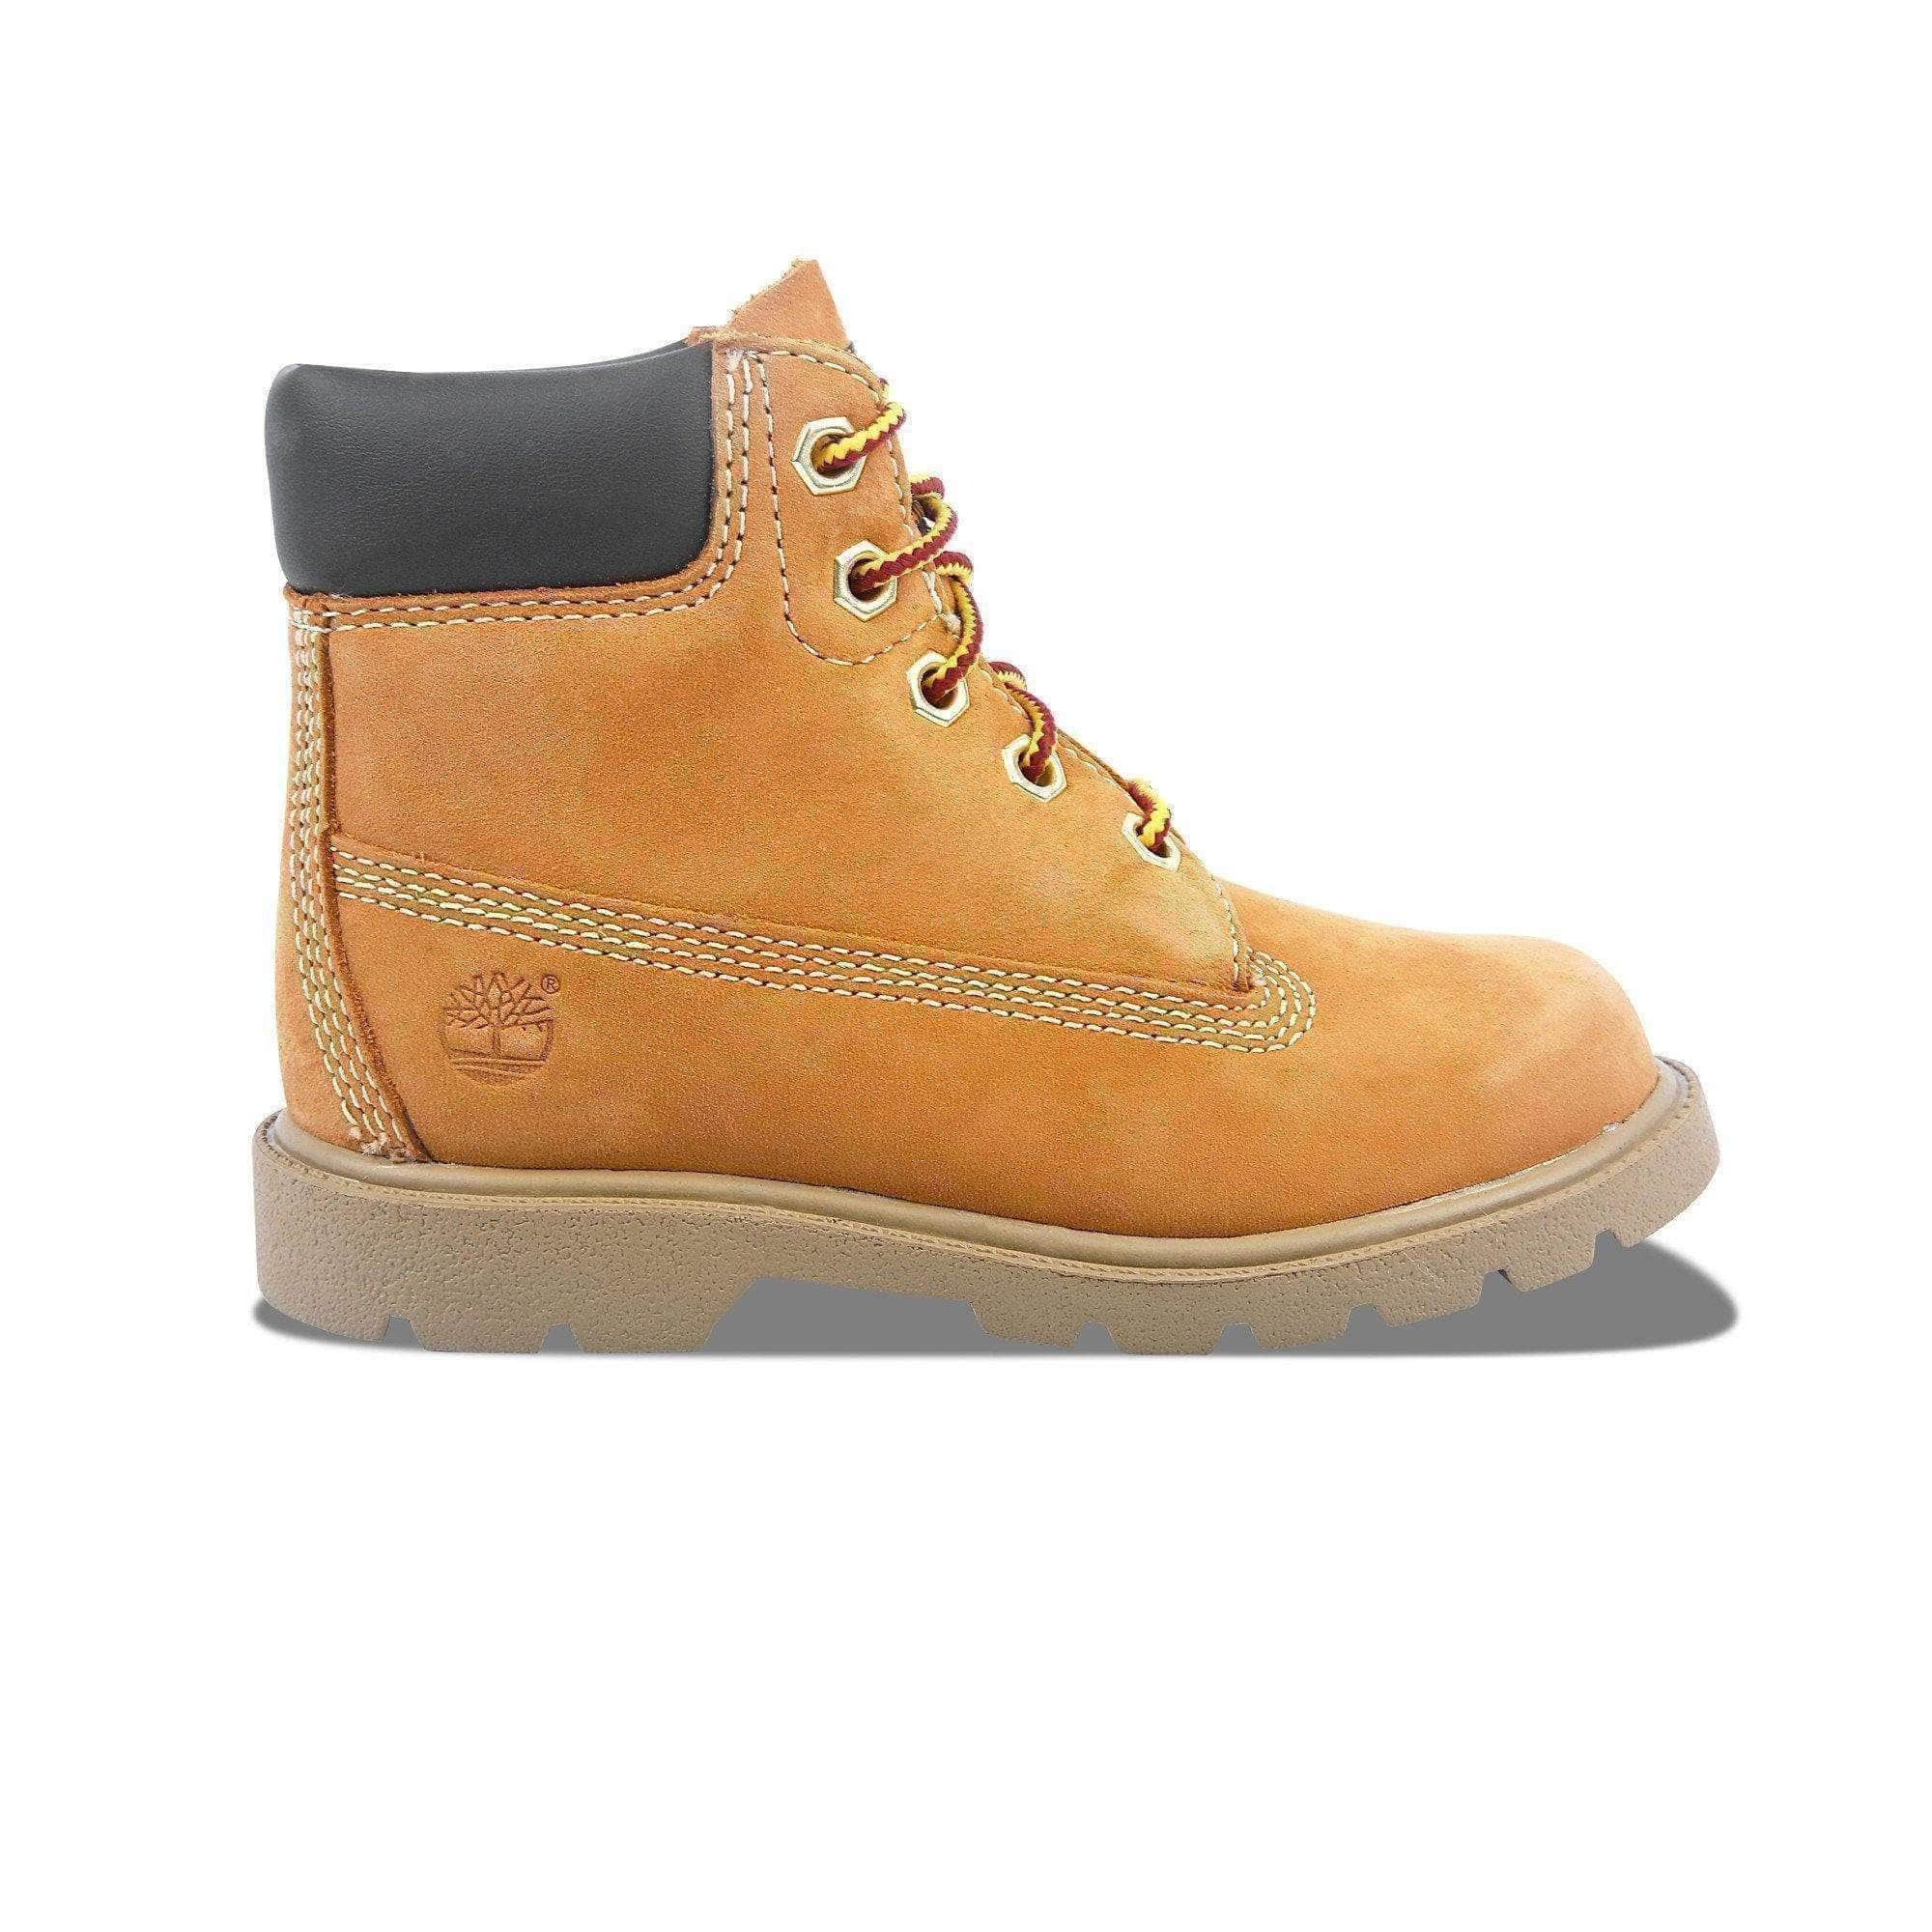 Timberland 6 Inch Wheat - Toddlers